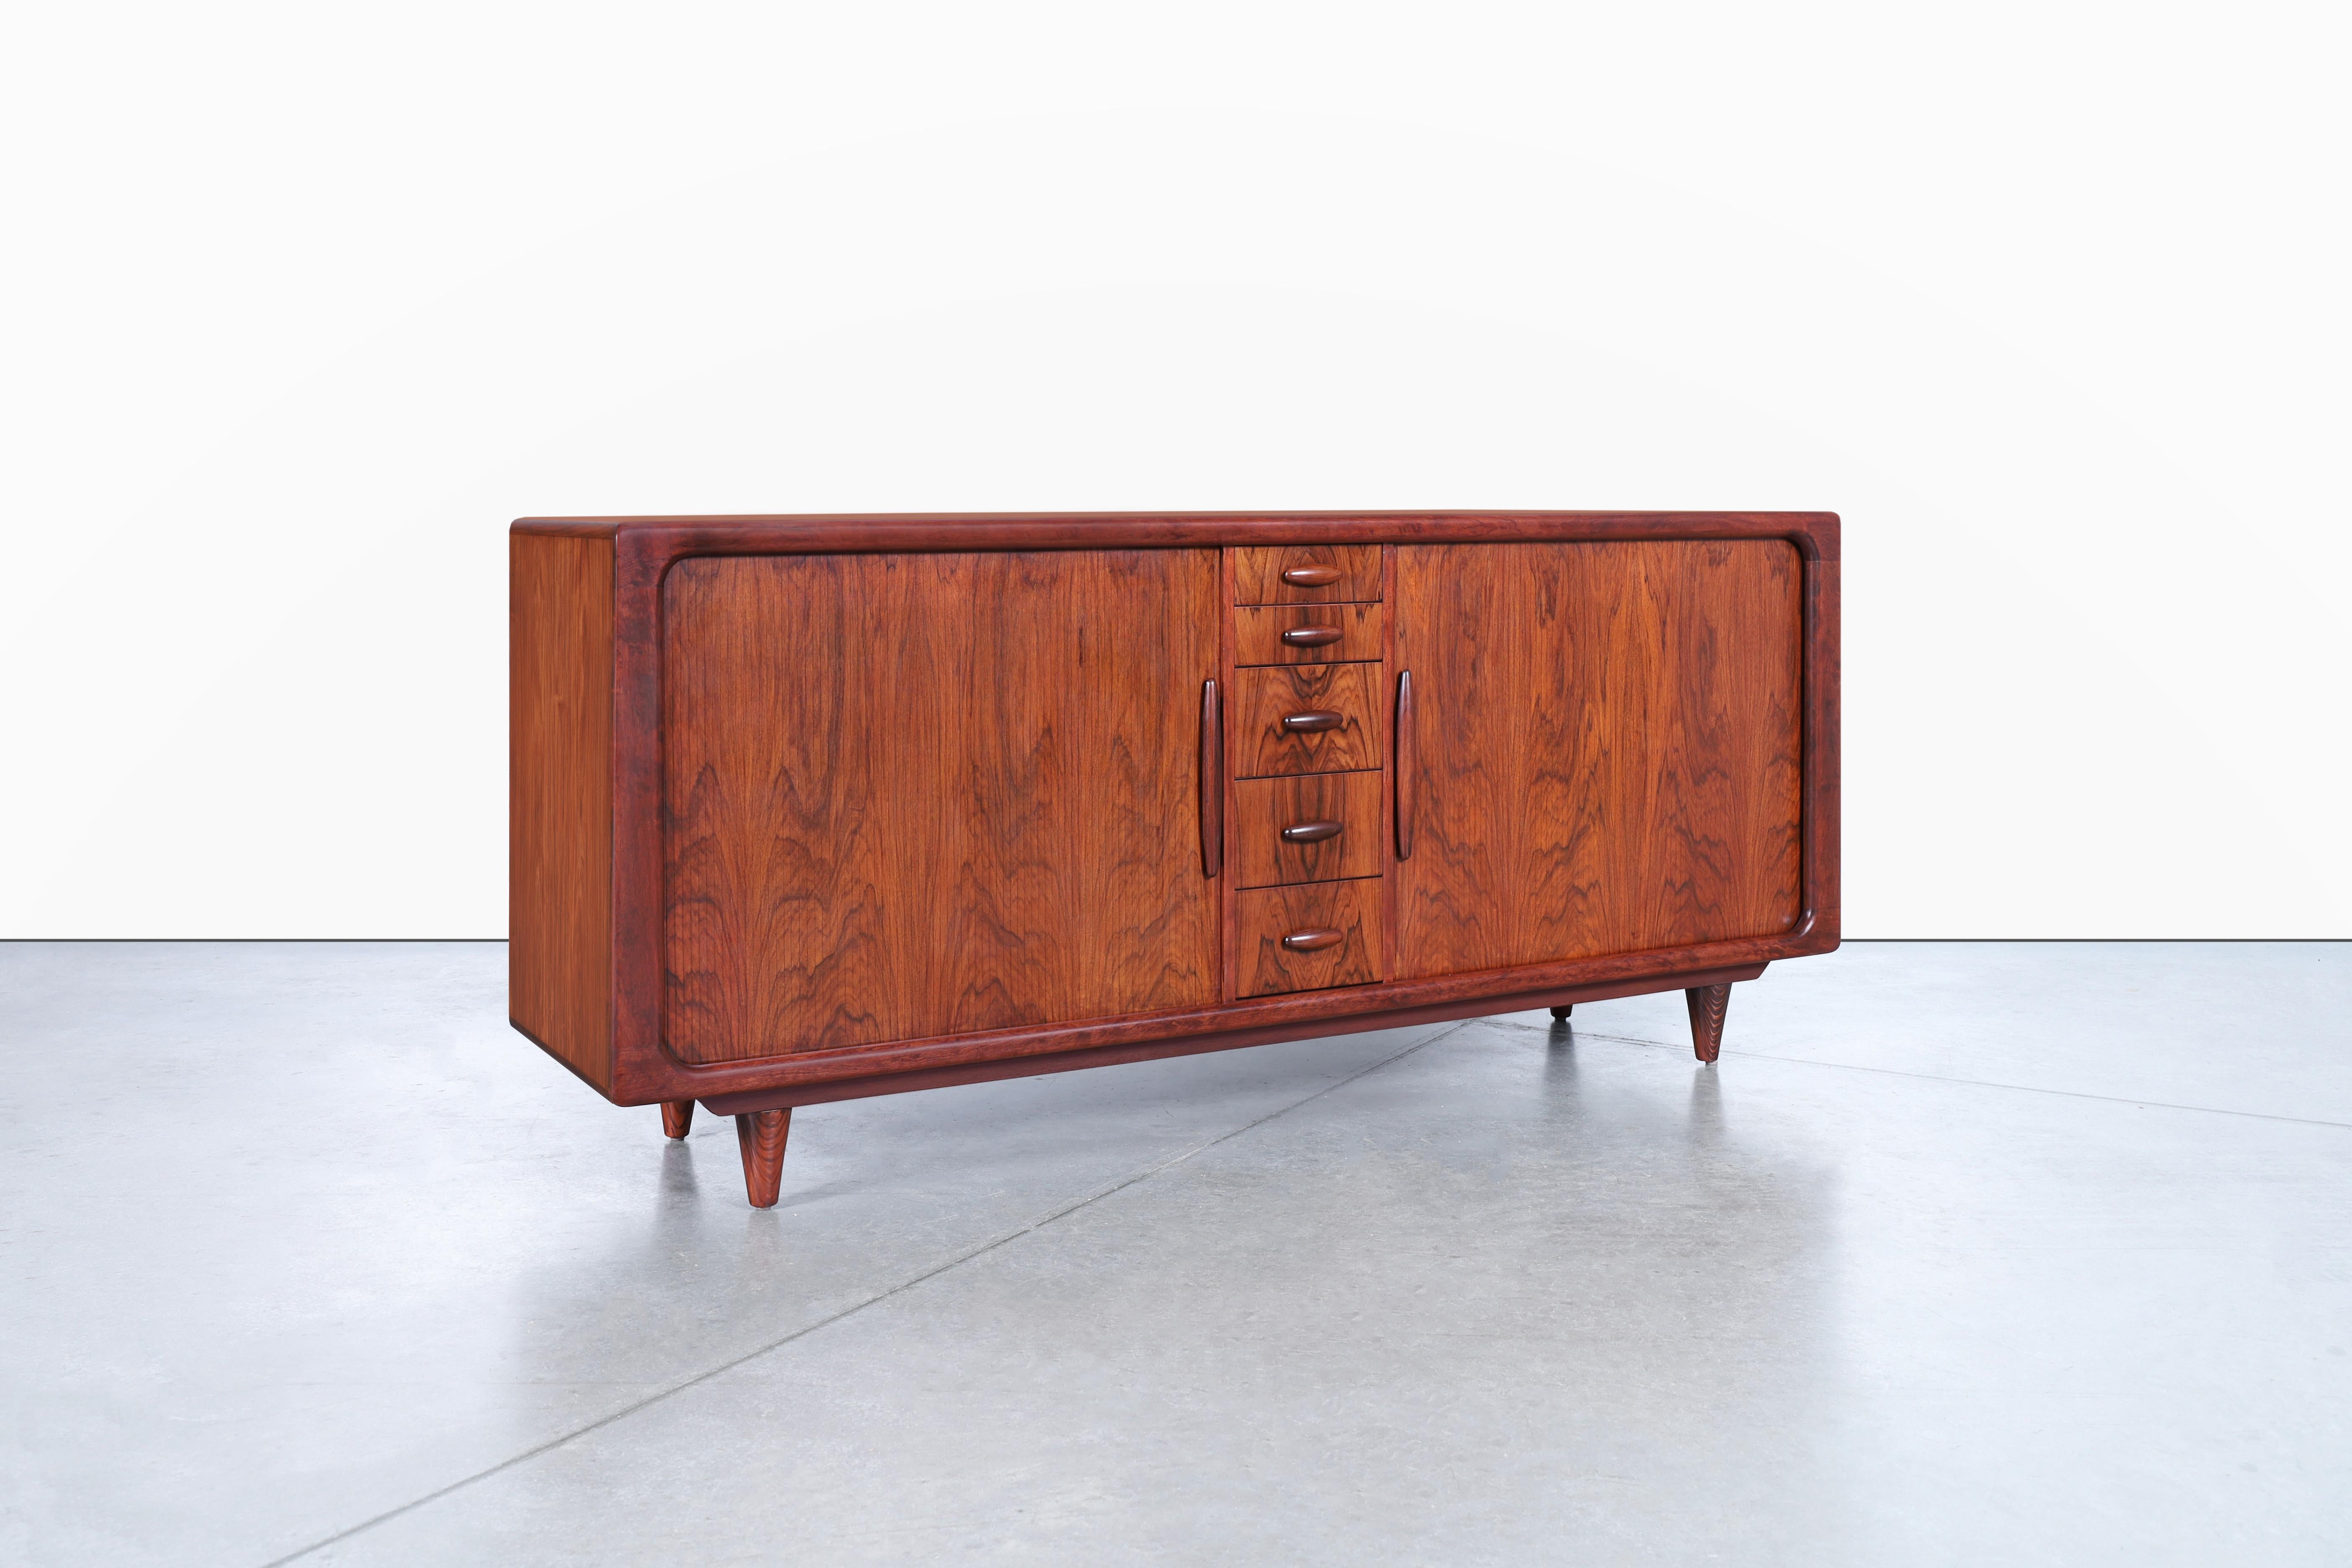 This stunning Danish modern tambour door credenza by Dyrlund, dating back to the 1960s in Denmark, is an elegant and practical piece of furniture that will add a touch of class to any room. The credenza has been expertly refinished, bringing out the